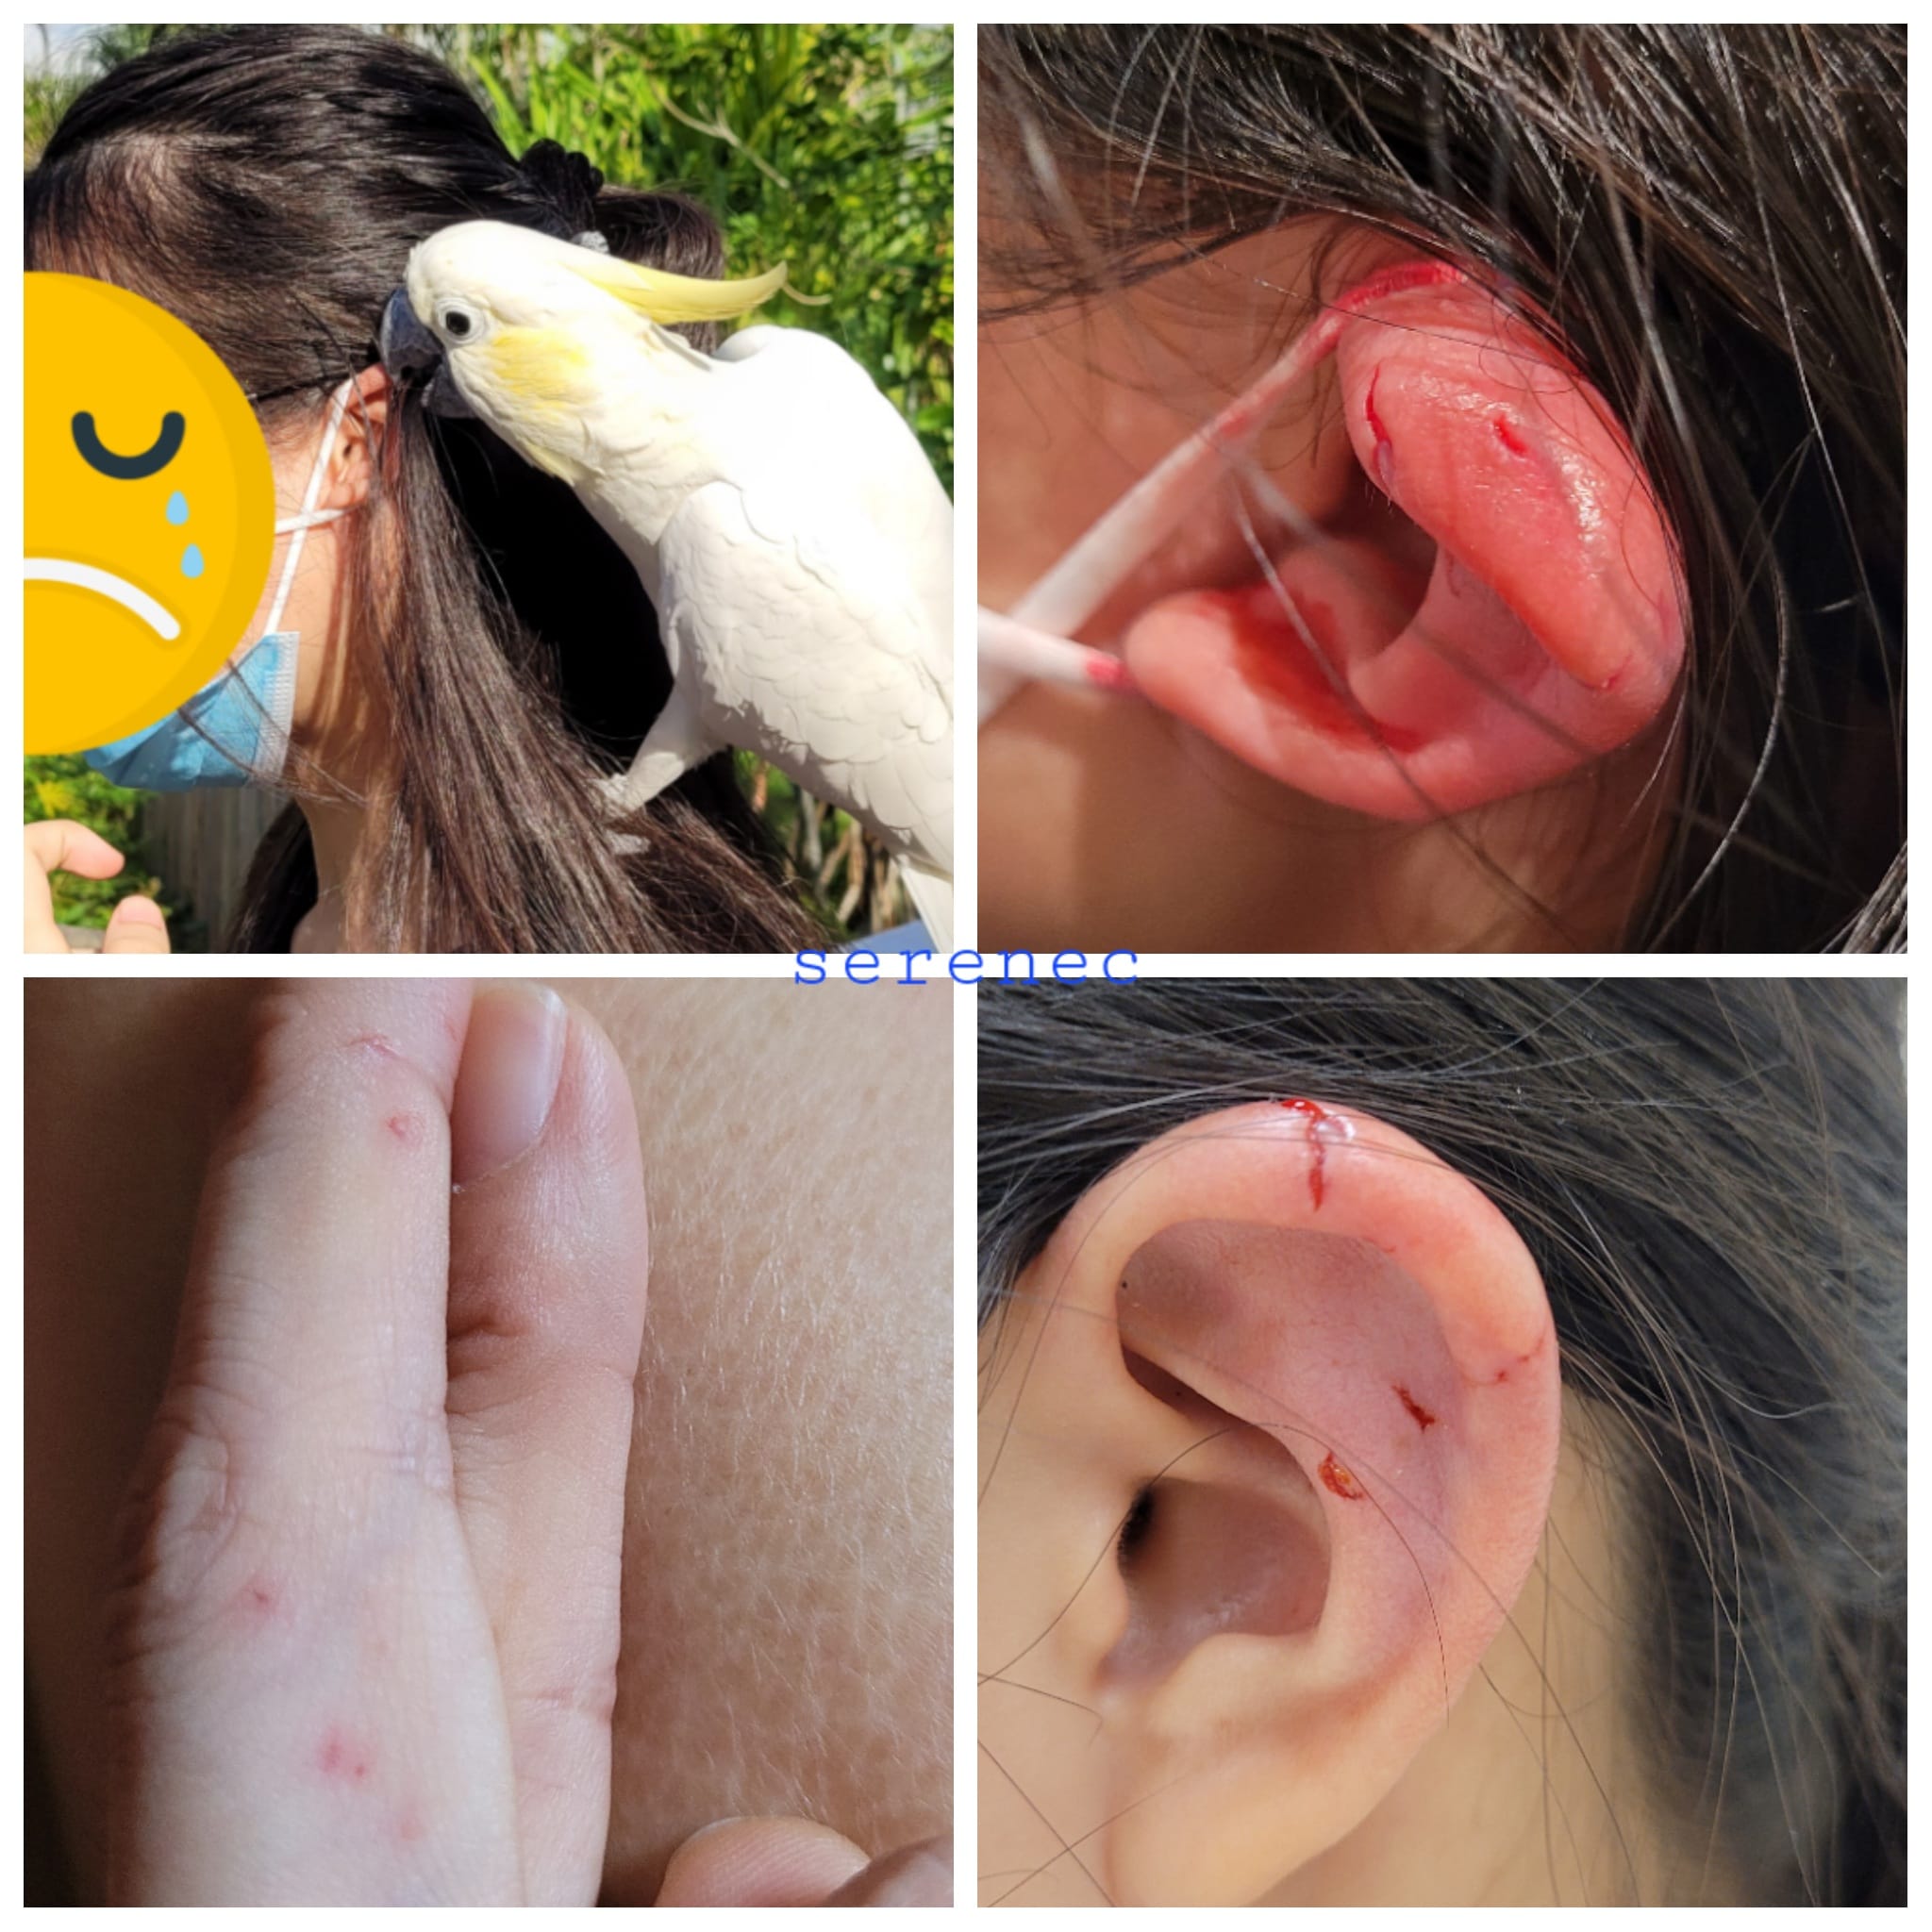 Clockwise from top left: The cockatoo perched in Chen's daughter's shoulder, Chen's daughter's ear after the incident, Chen's finger after the incident